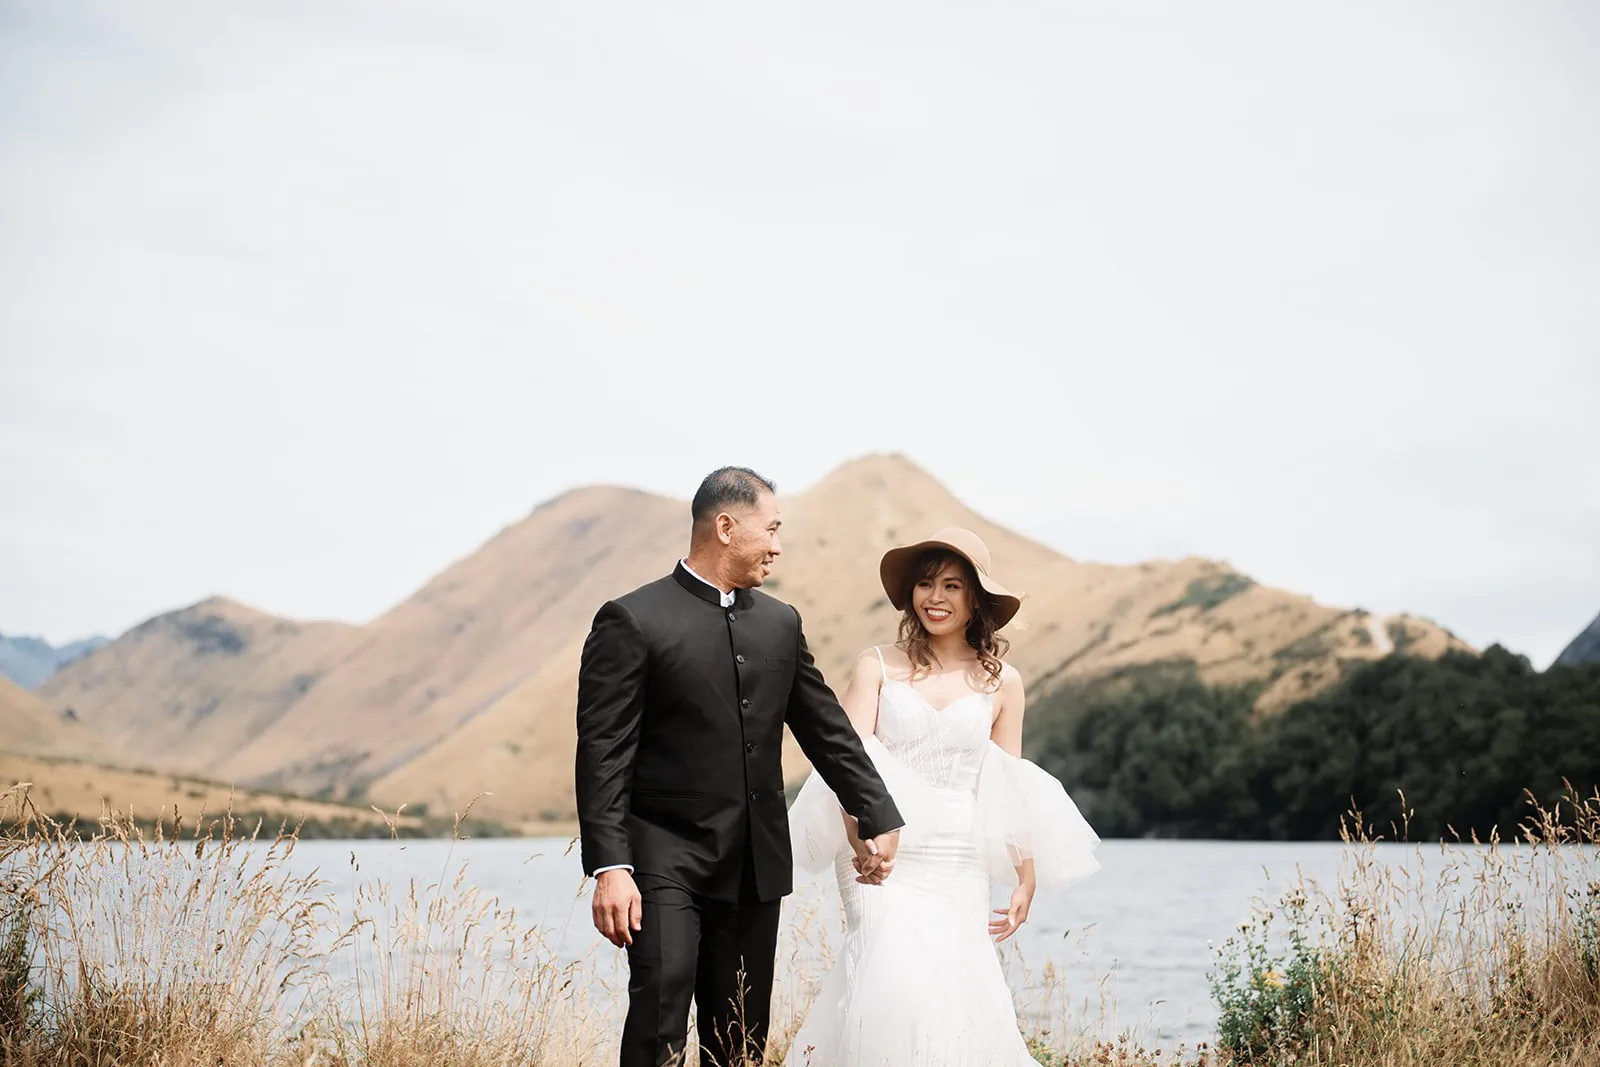 A pre-wedding shoot featuring Nhi and Nicholas, set against the stunning backdrop of Queenstown's Cecil Peak with a lake and mountains.